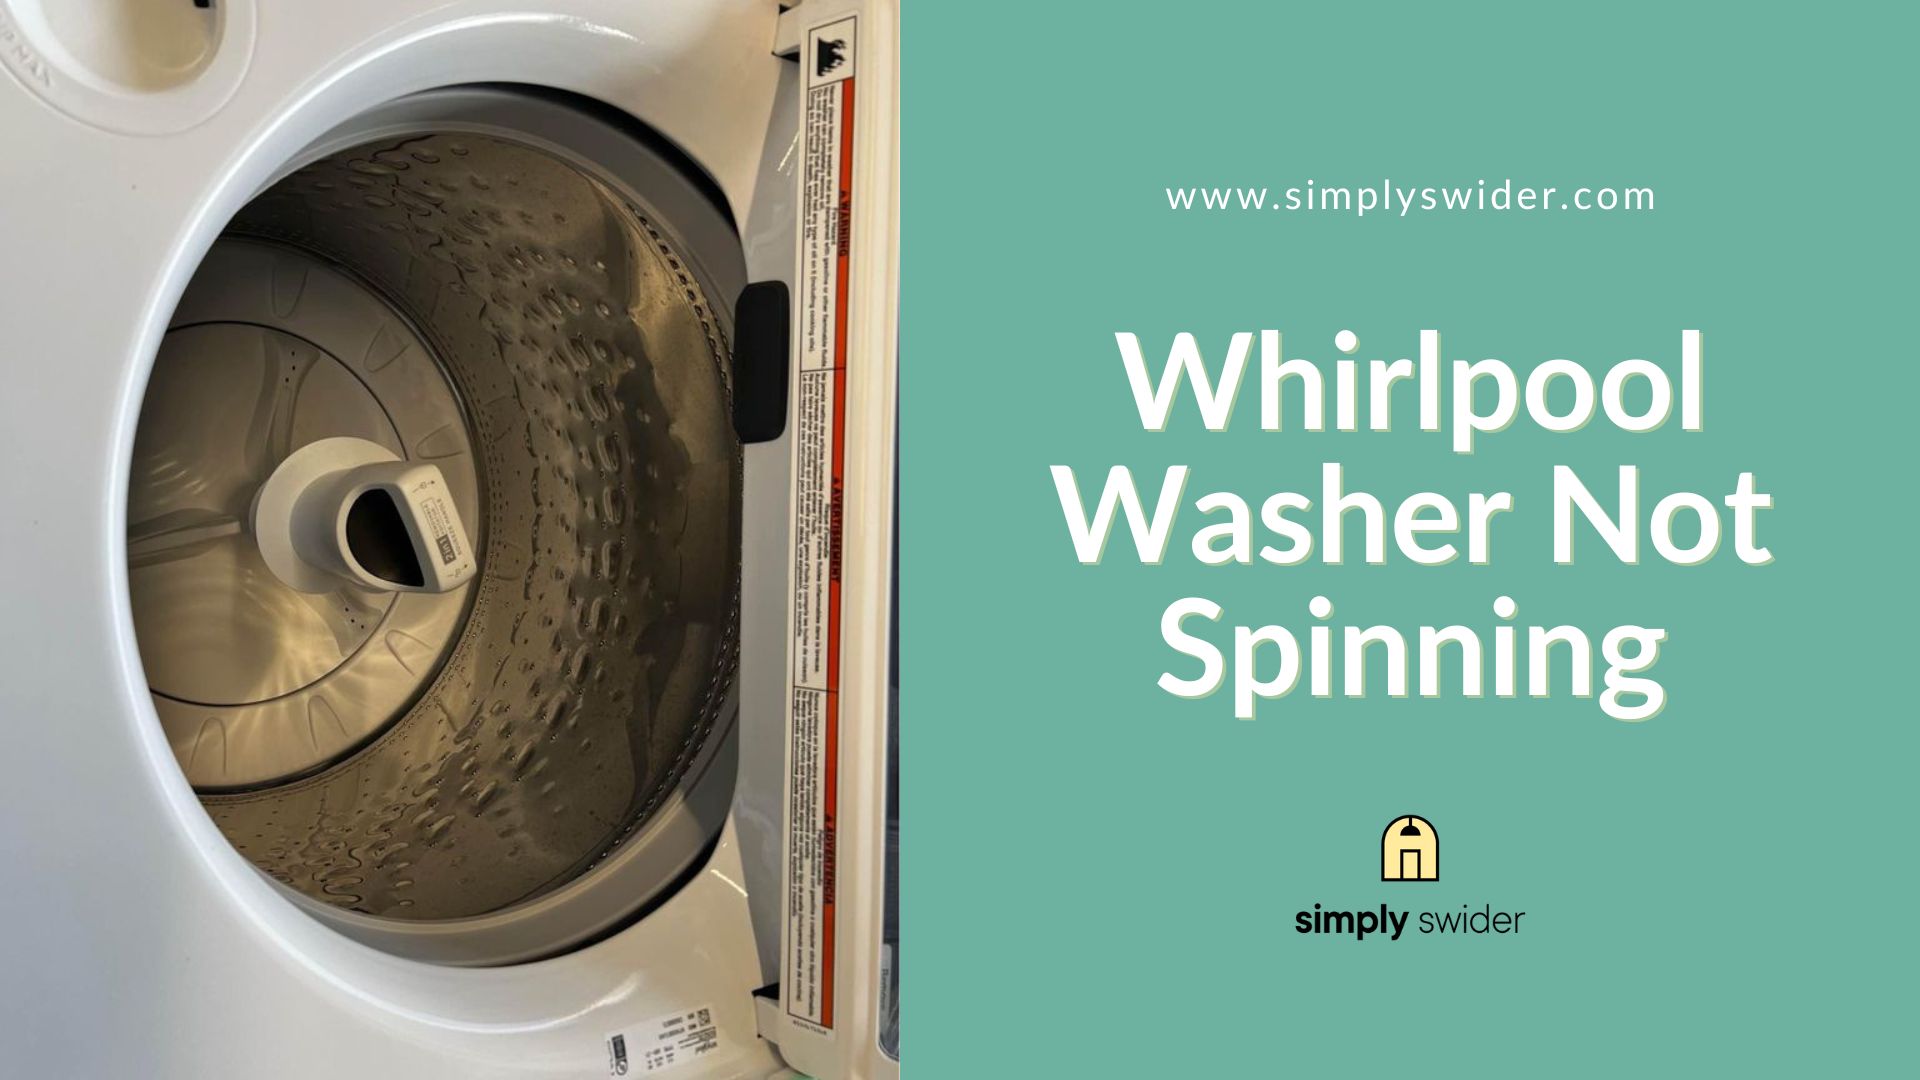 Whirlpool Washer Not Spinning